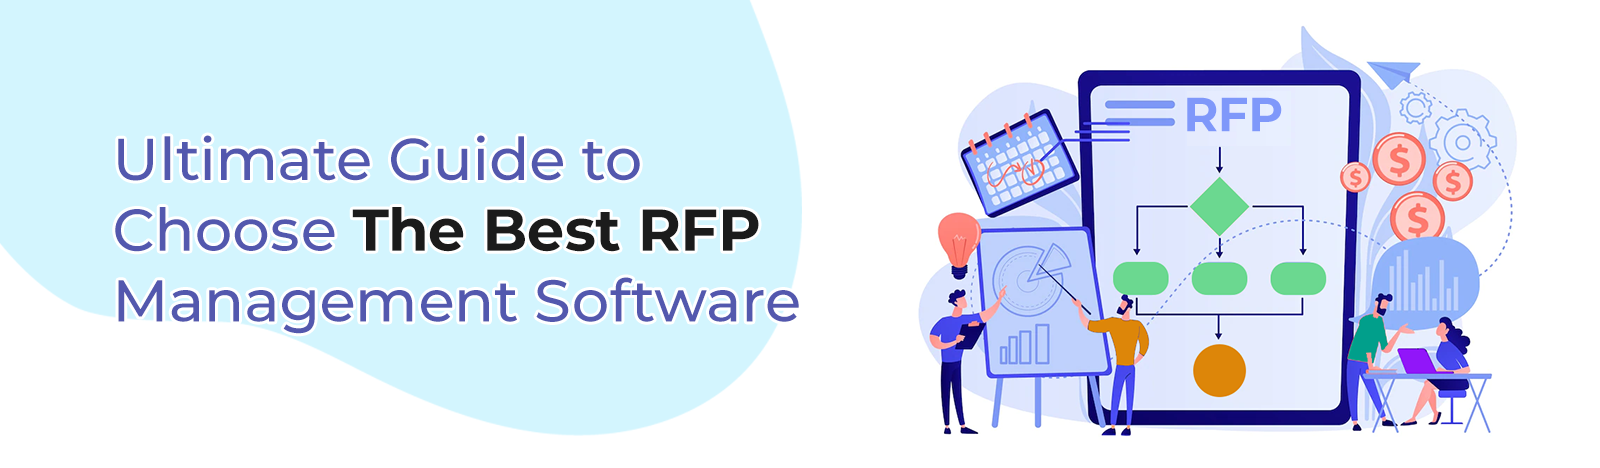 Ultimate Guide to Choose The Best RFP Management Software